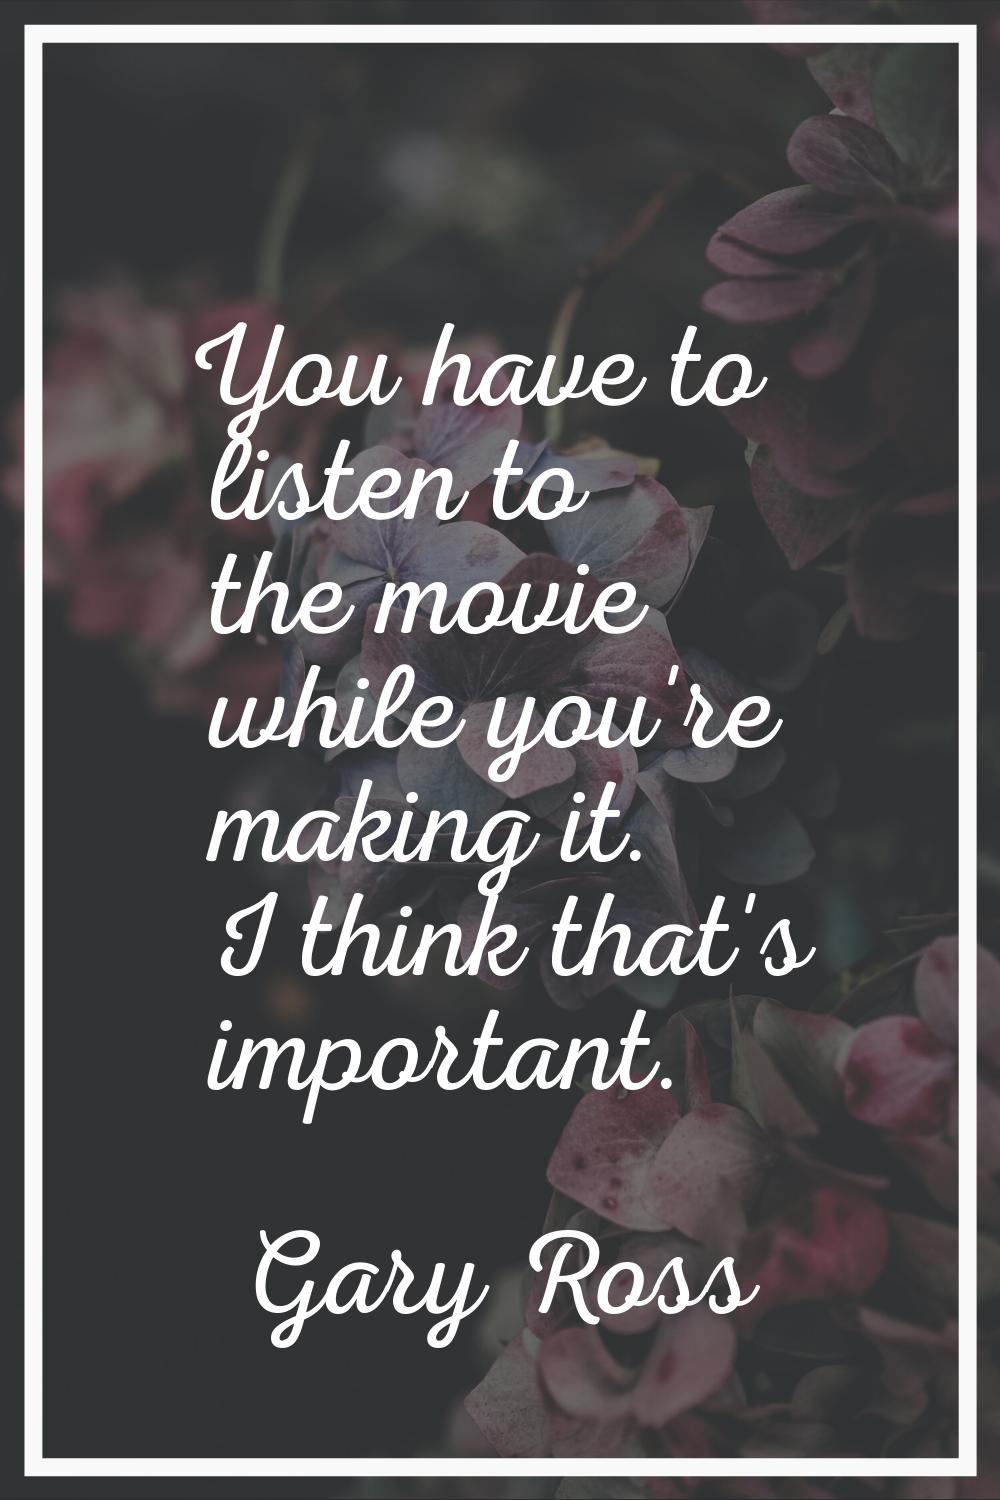 You have to listen to the movie while you're making it. I think that's important.